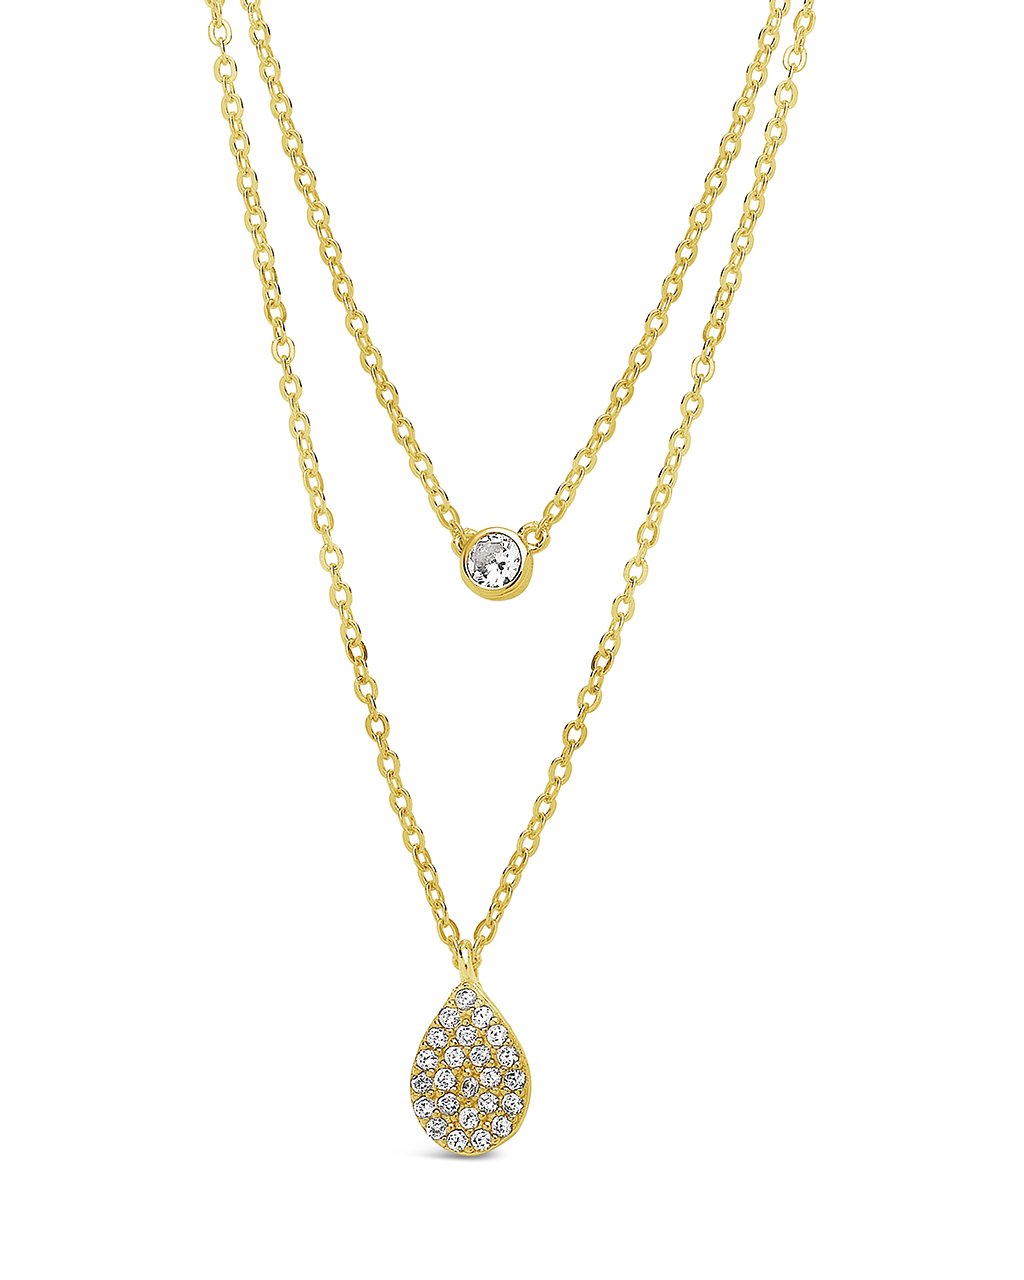 Sterling Silver Teardrop & CZ Layered Necklace Necklace Sterling Forever Gold 